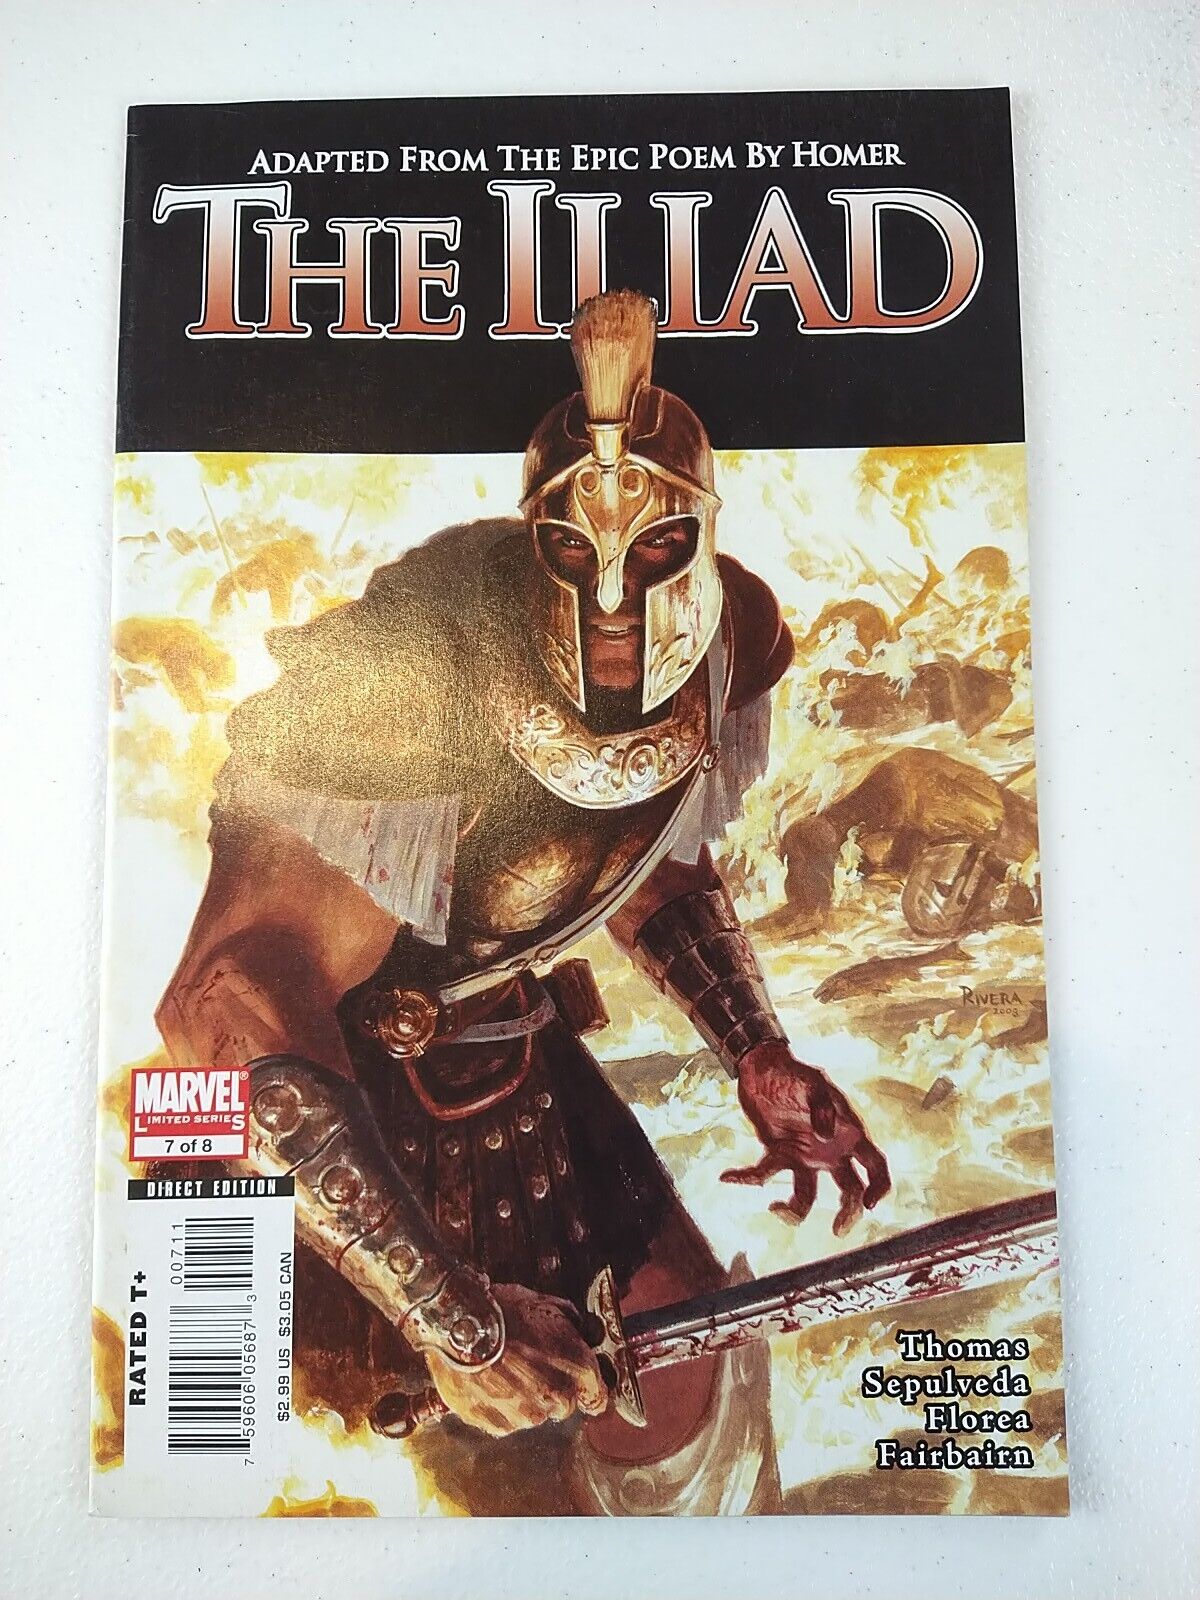 The Illiad #7 (2008 Marvel Comics) HTF Limited Series, Achilles Hector Homer